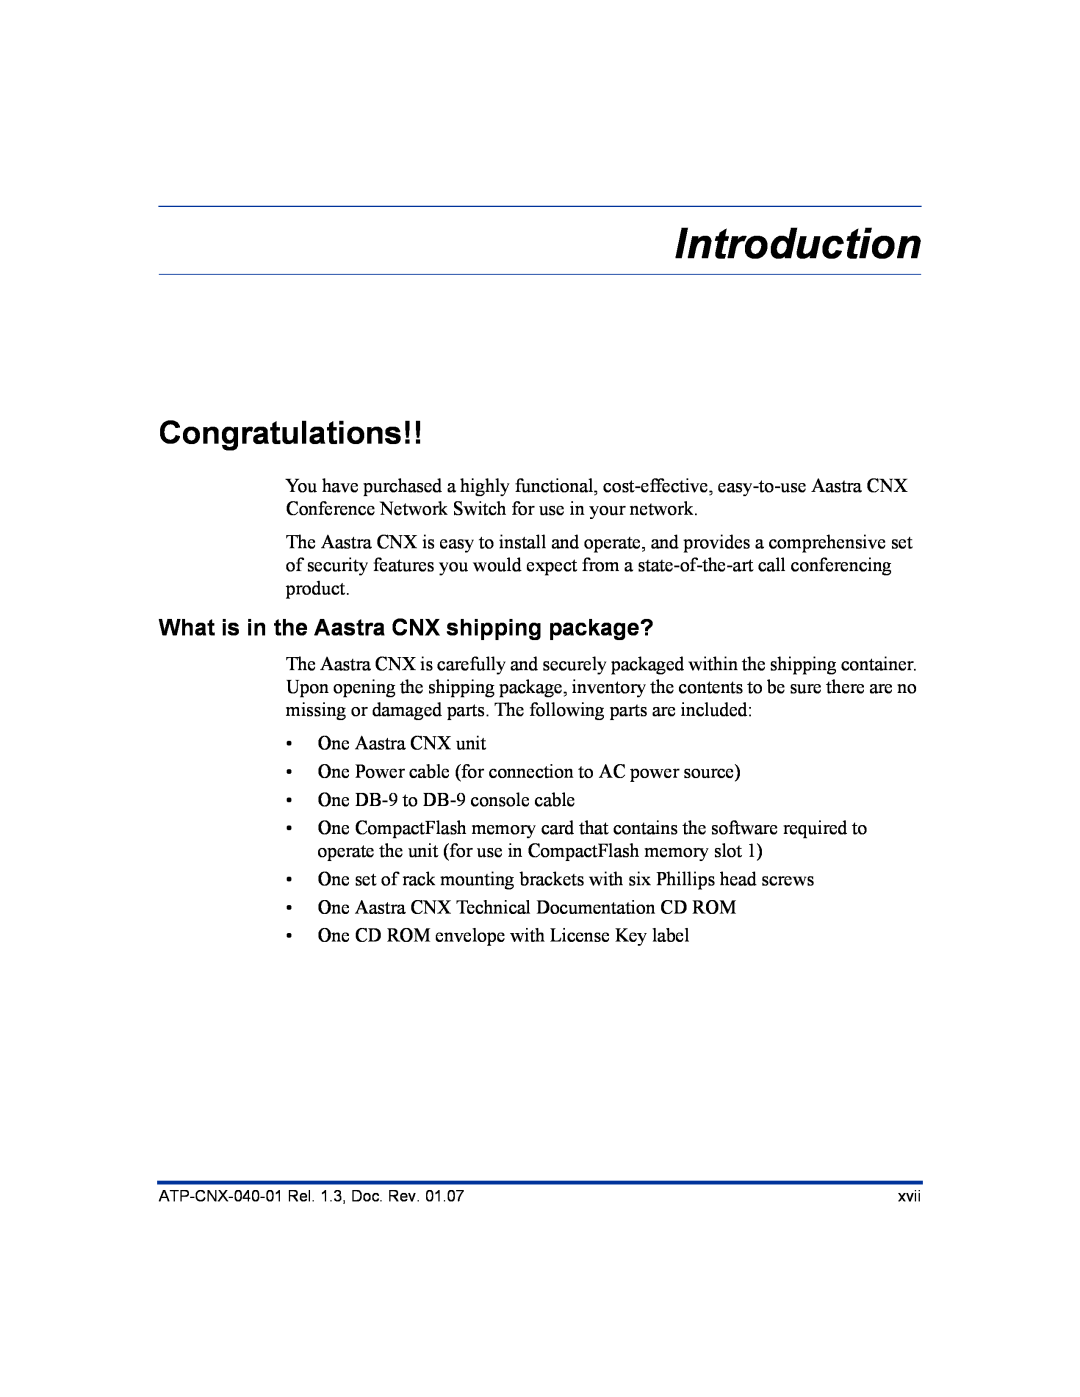 Aastra Telecom ATP-CNX-040-01 manual Introduction, Congratulations, What is in the Aastra CNX shipping package? 